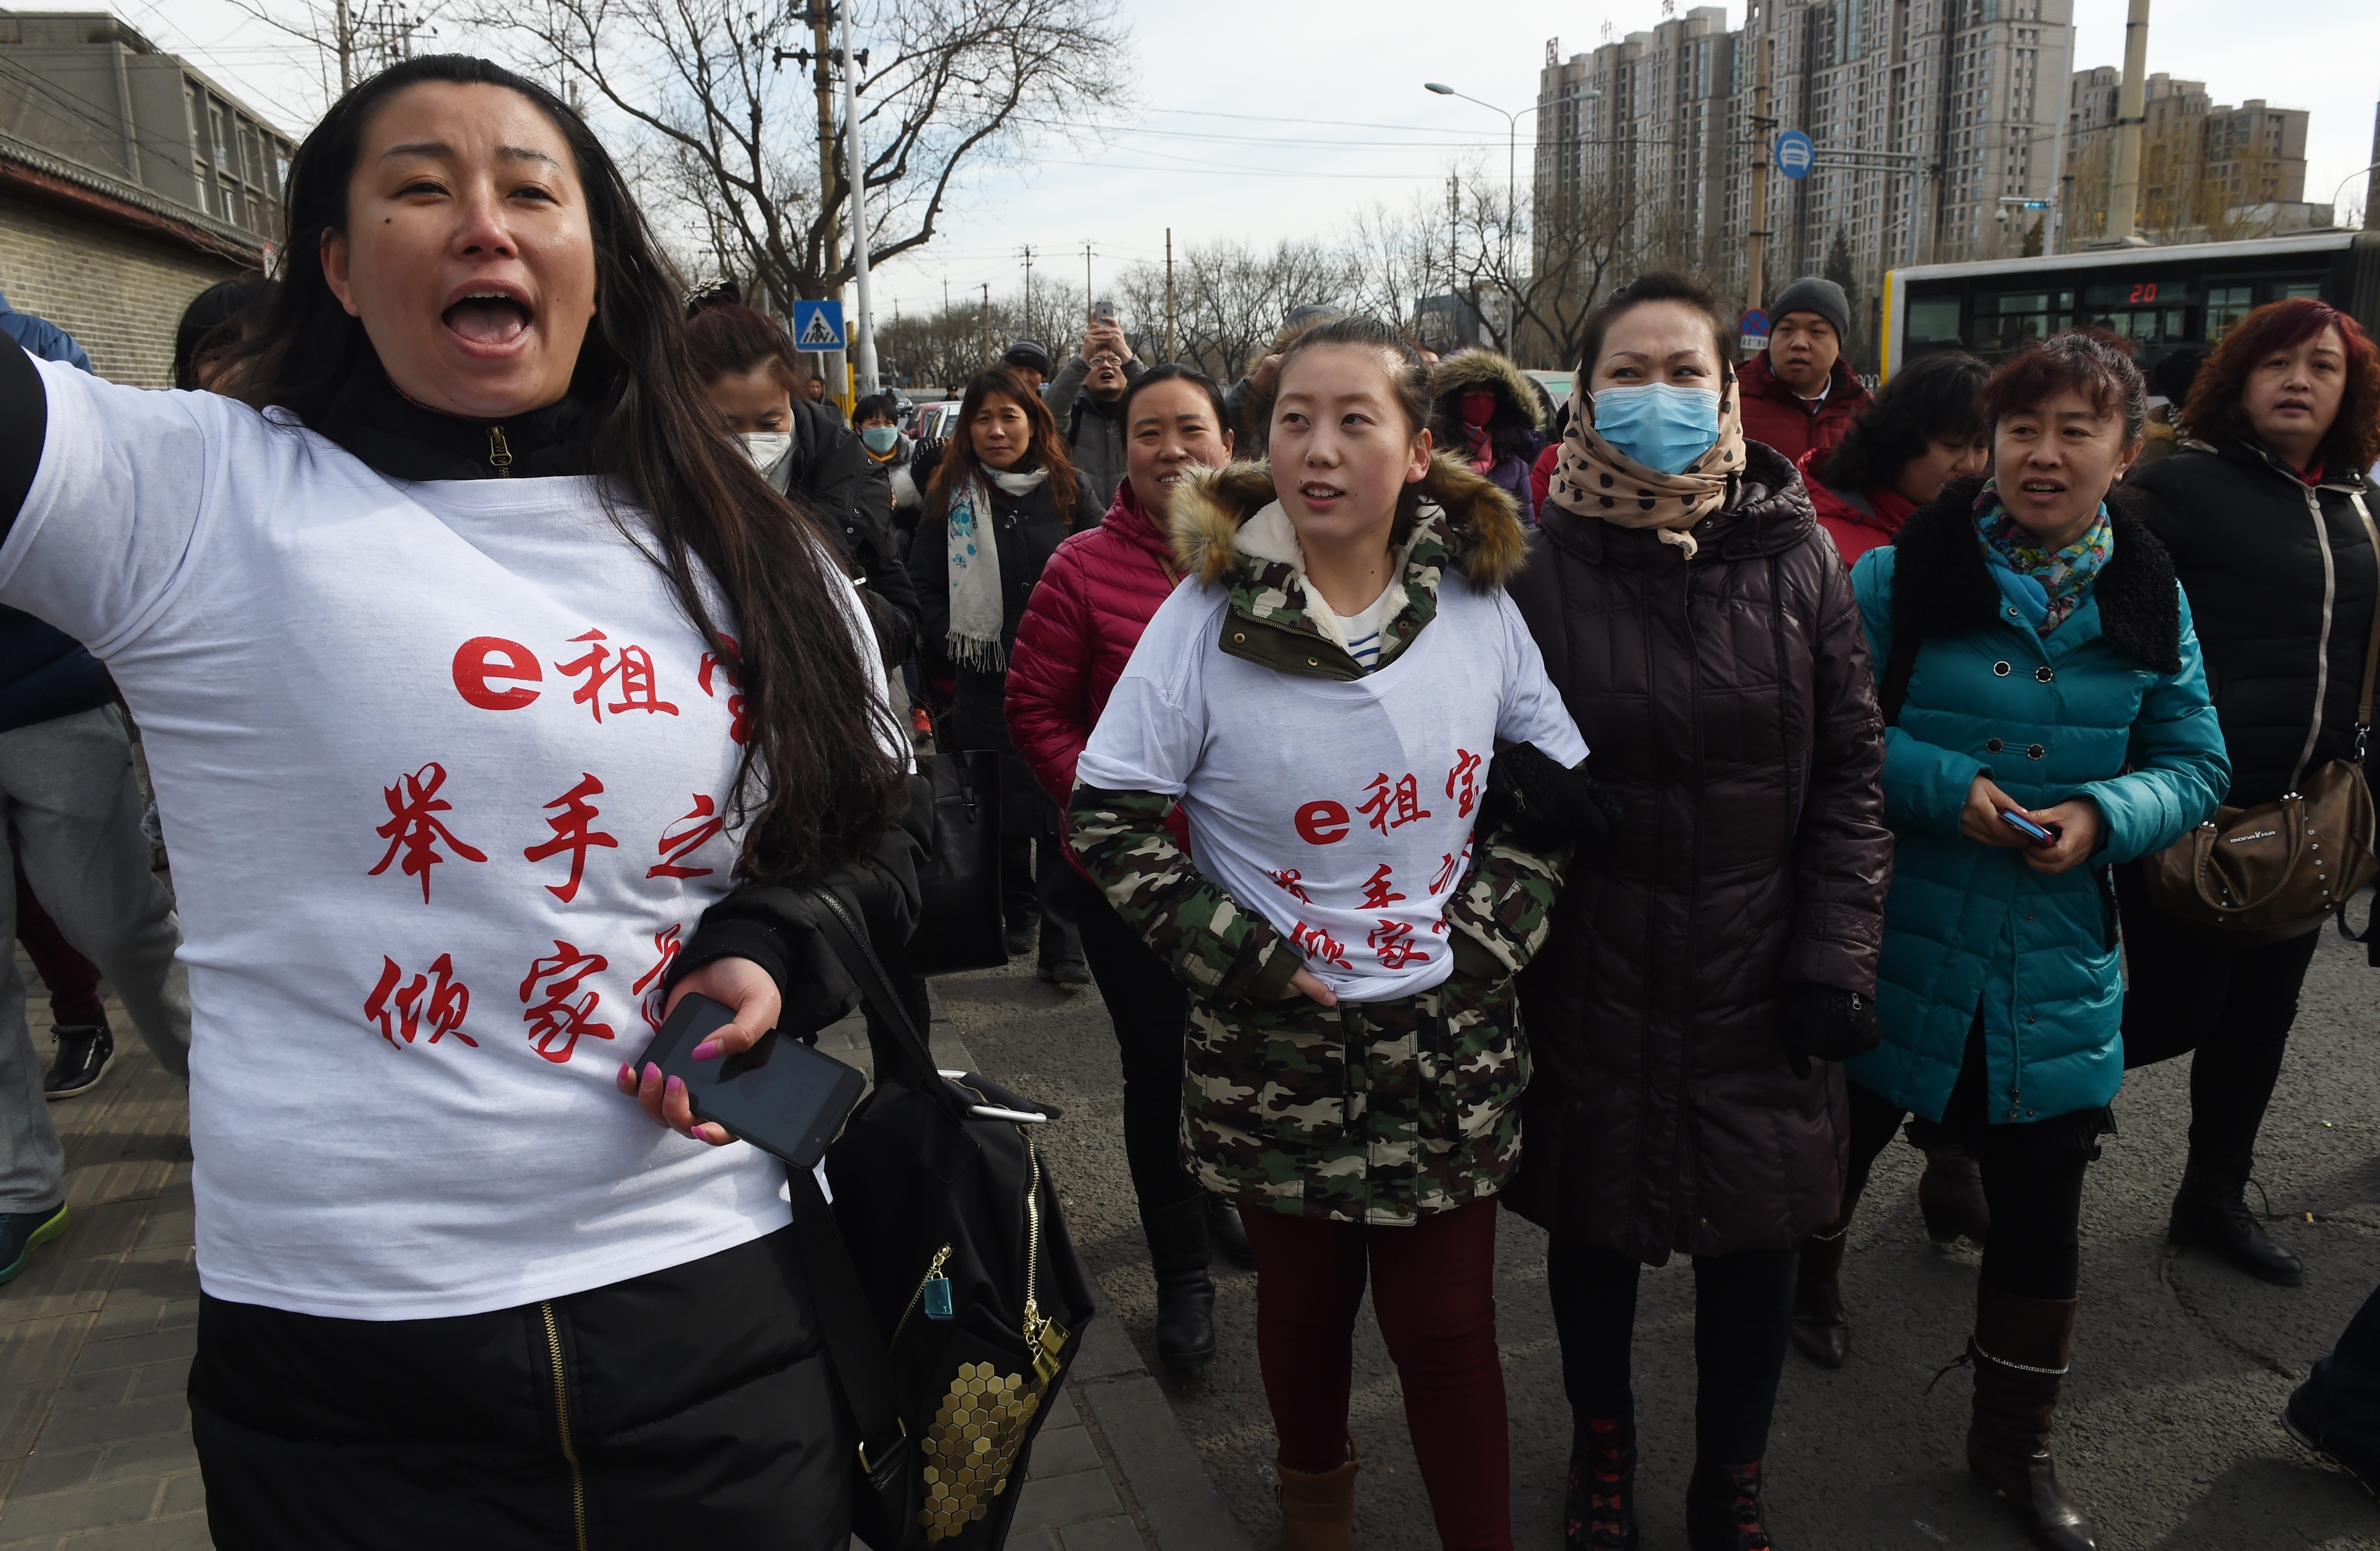 This photo taken on February 4, 2016 shows investors in Chinese online peer-to-peer lender Ezubao chanting slogans during a protest in Beijing. The protest came days after China announced that 21 people had been arrested on suspicion of defrauding around 900,000 people of more than 50 billion yuan, after Ezubao turned out to be a giant Ponzi scheme. Photo: Agence France-Presse